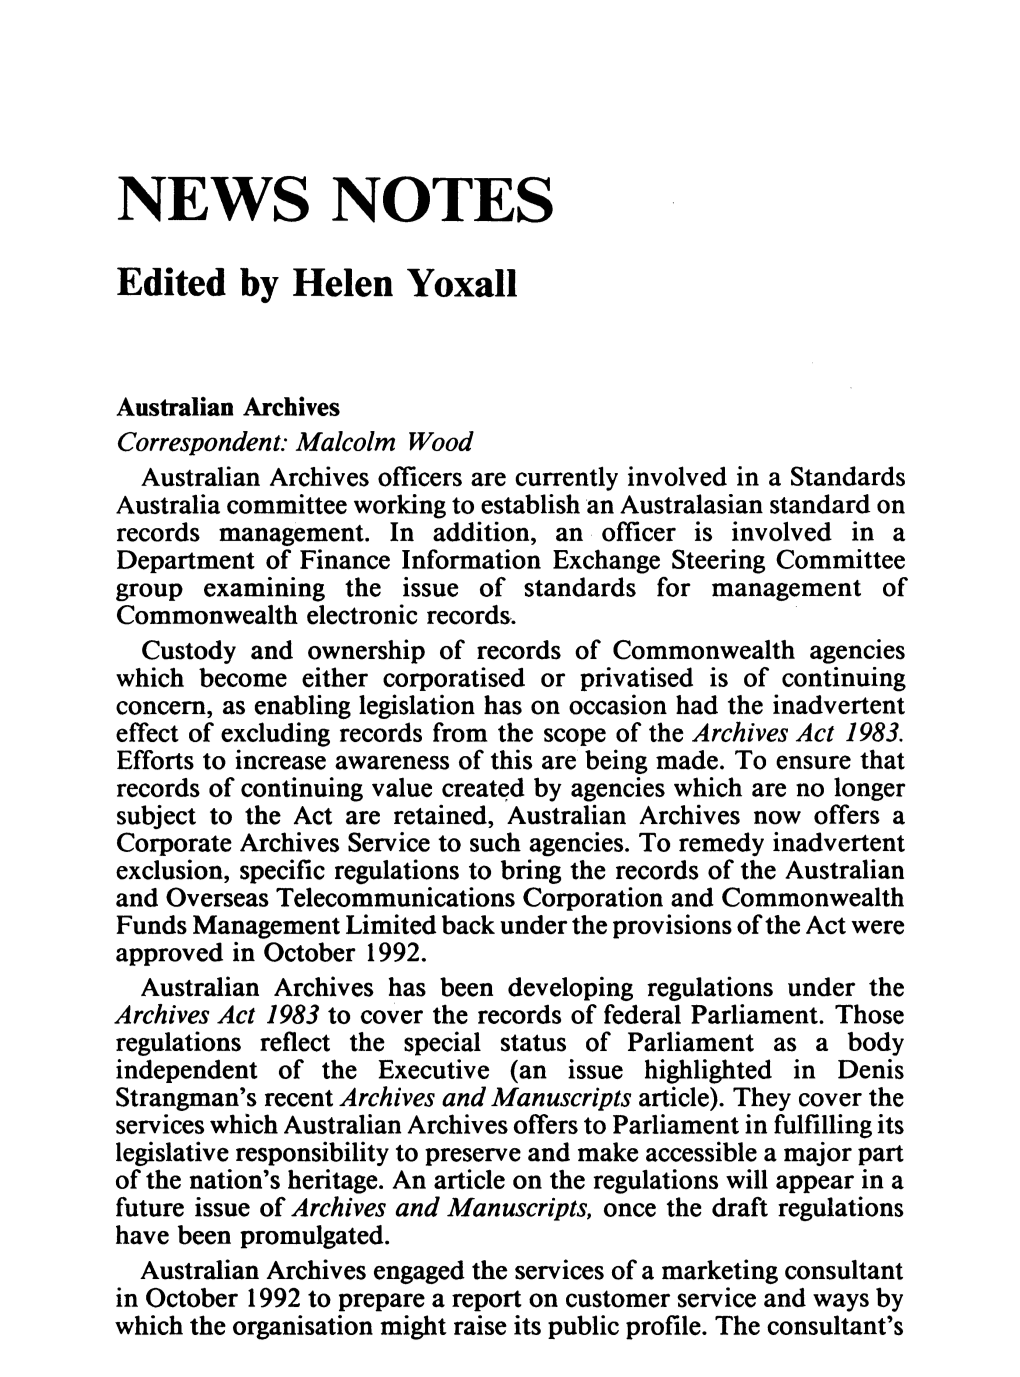 NEWS NOTES Edited by Helen Yoxall